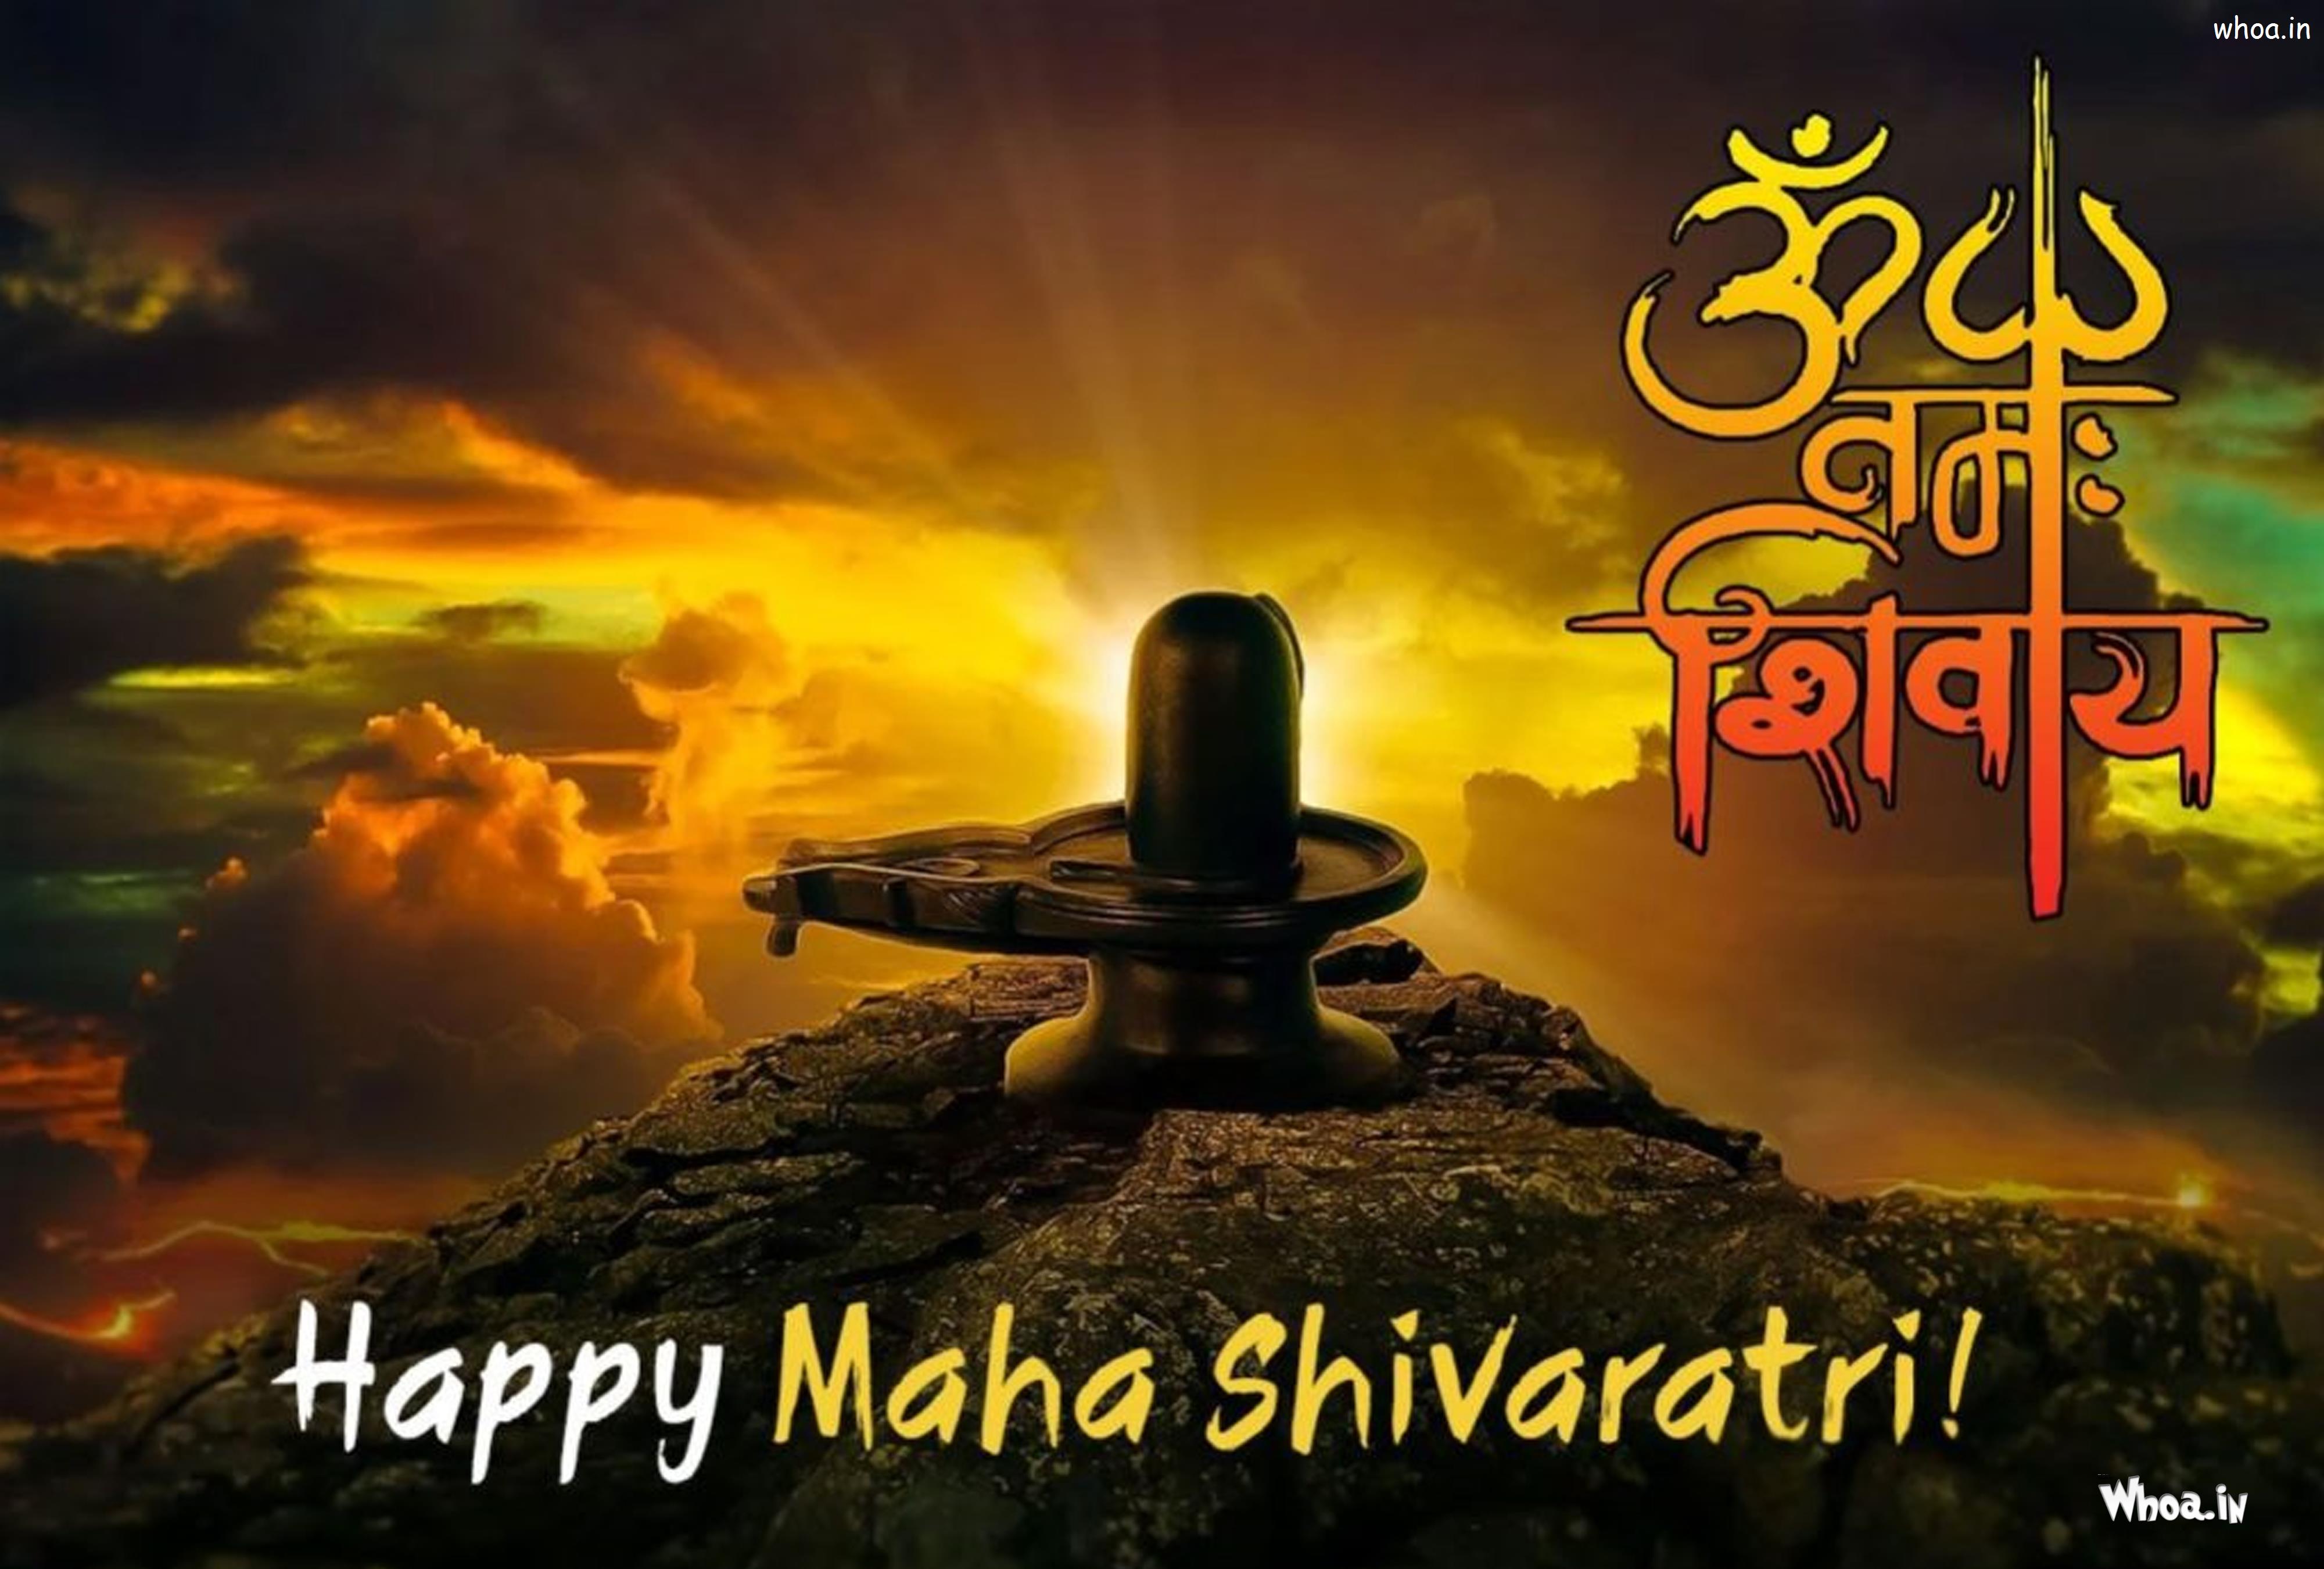 Happy Mahashivratri Images And HD Wallpapers Free Download